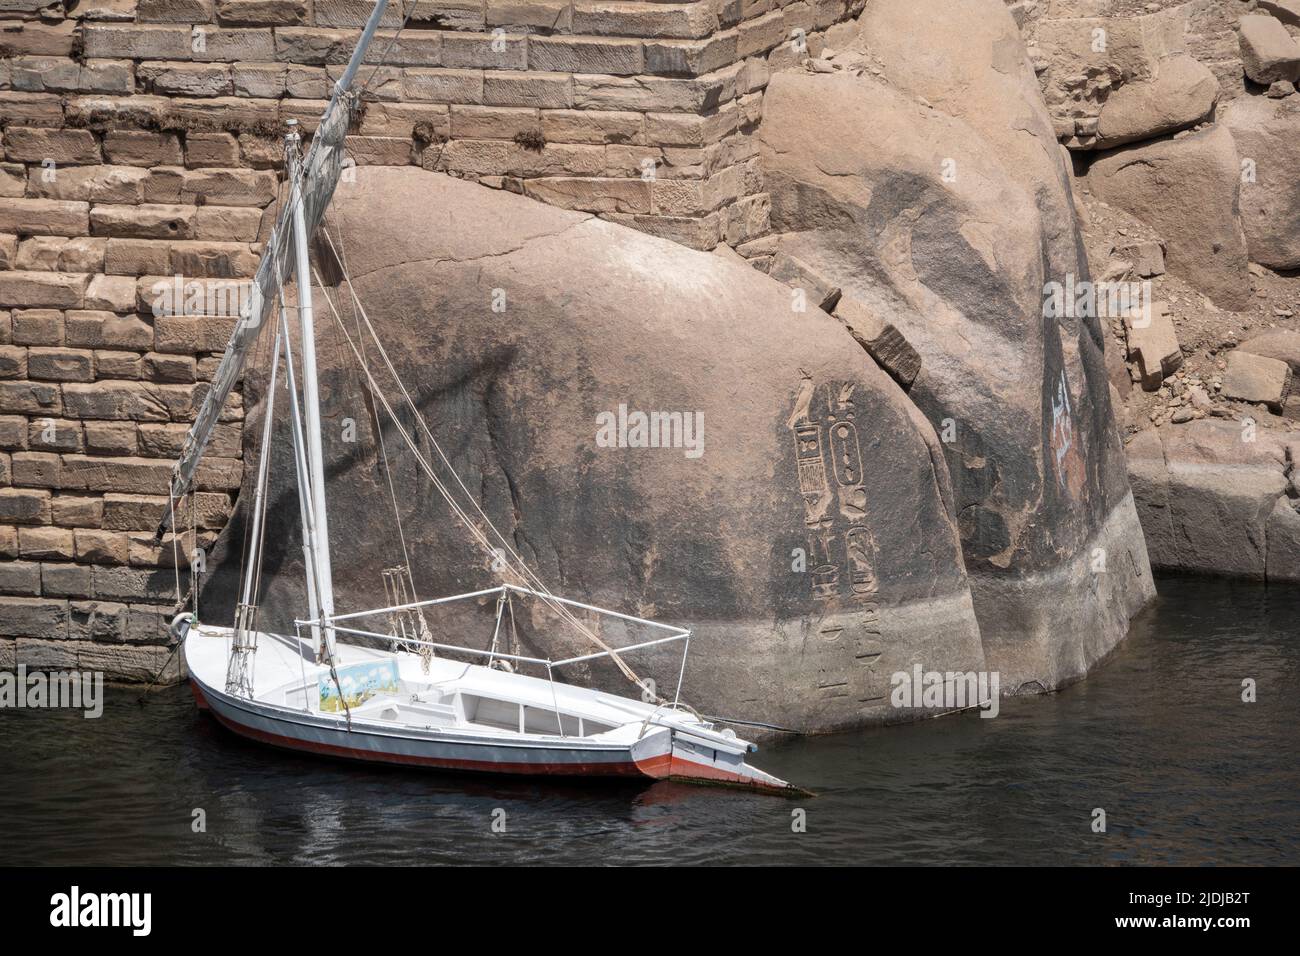 Felucca moored in Aswan in front of Granite boulders with pharaonic inscriptions, Egypt Stock Photo